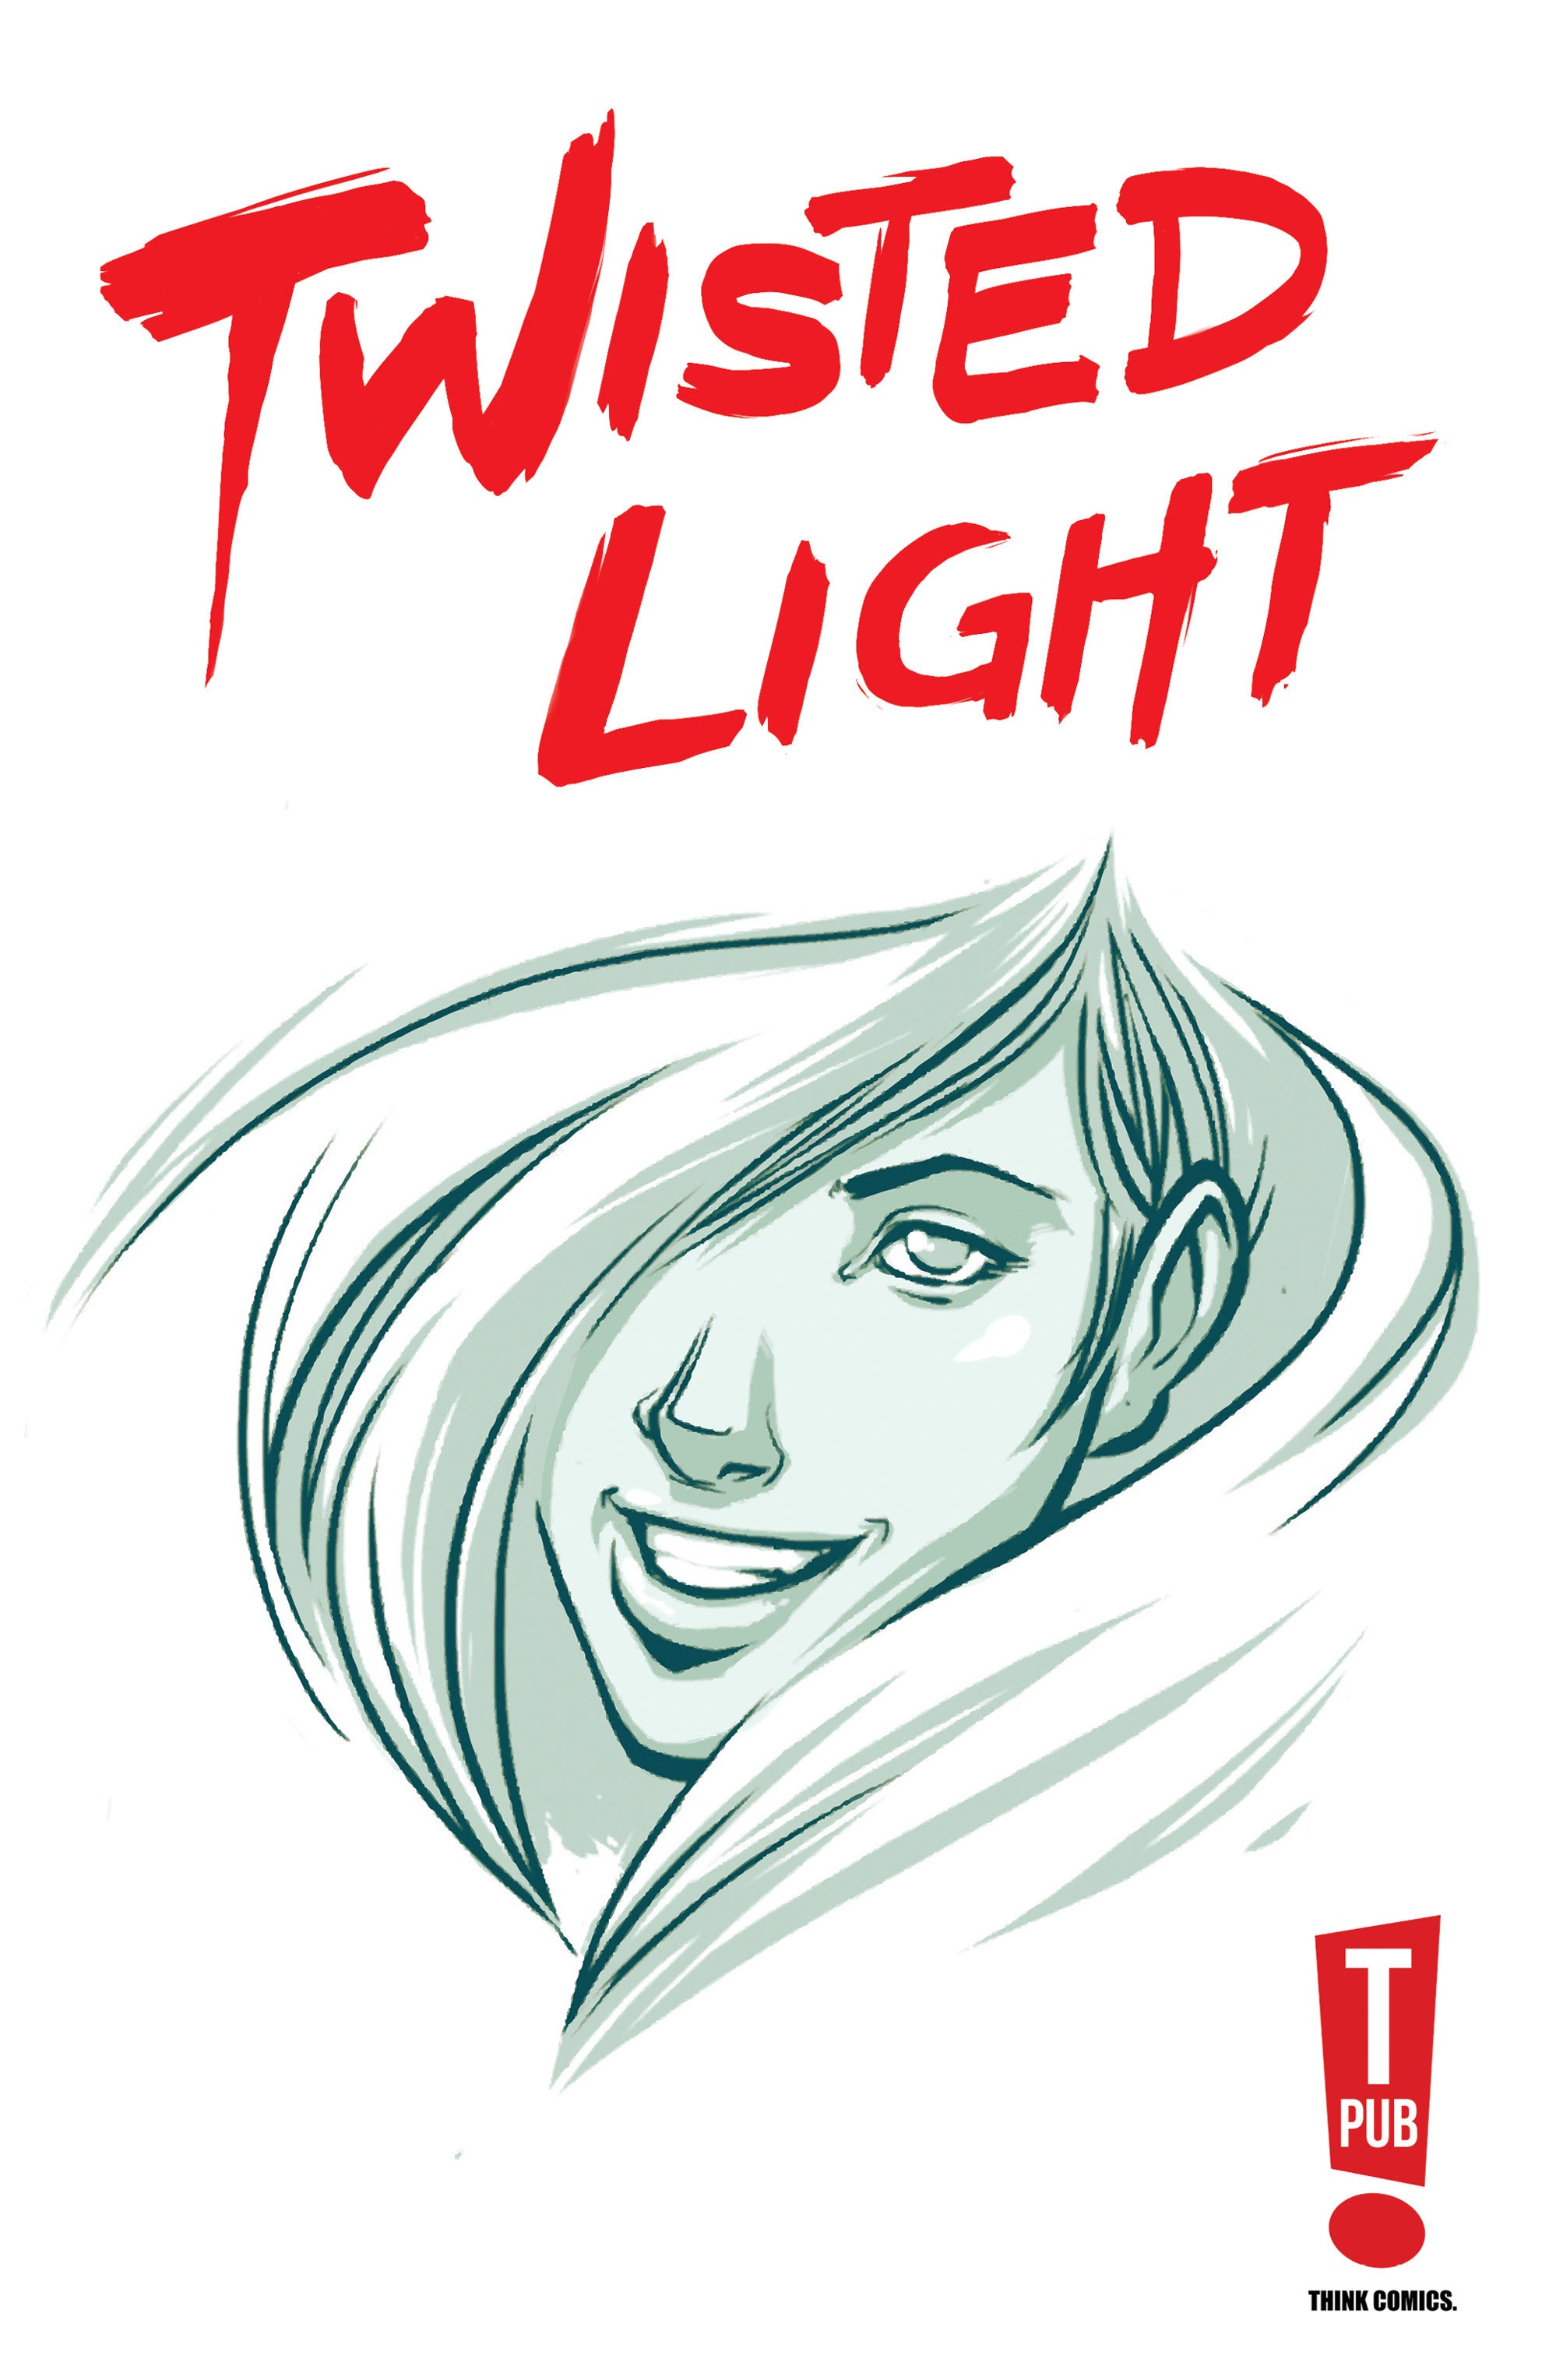 Read online Twisted Light comic -  Issue # TPB - 2